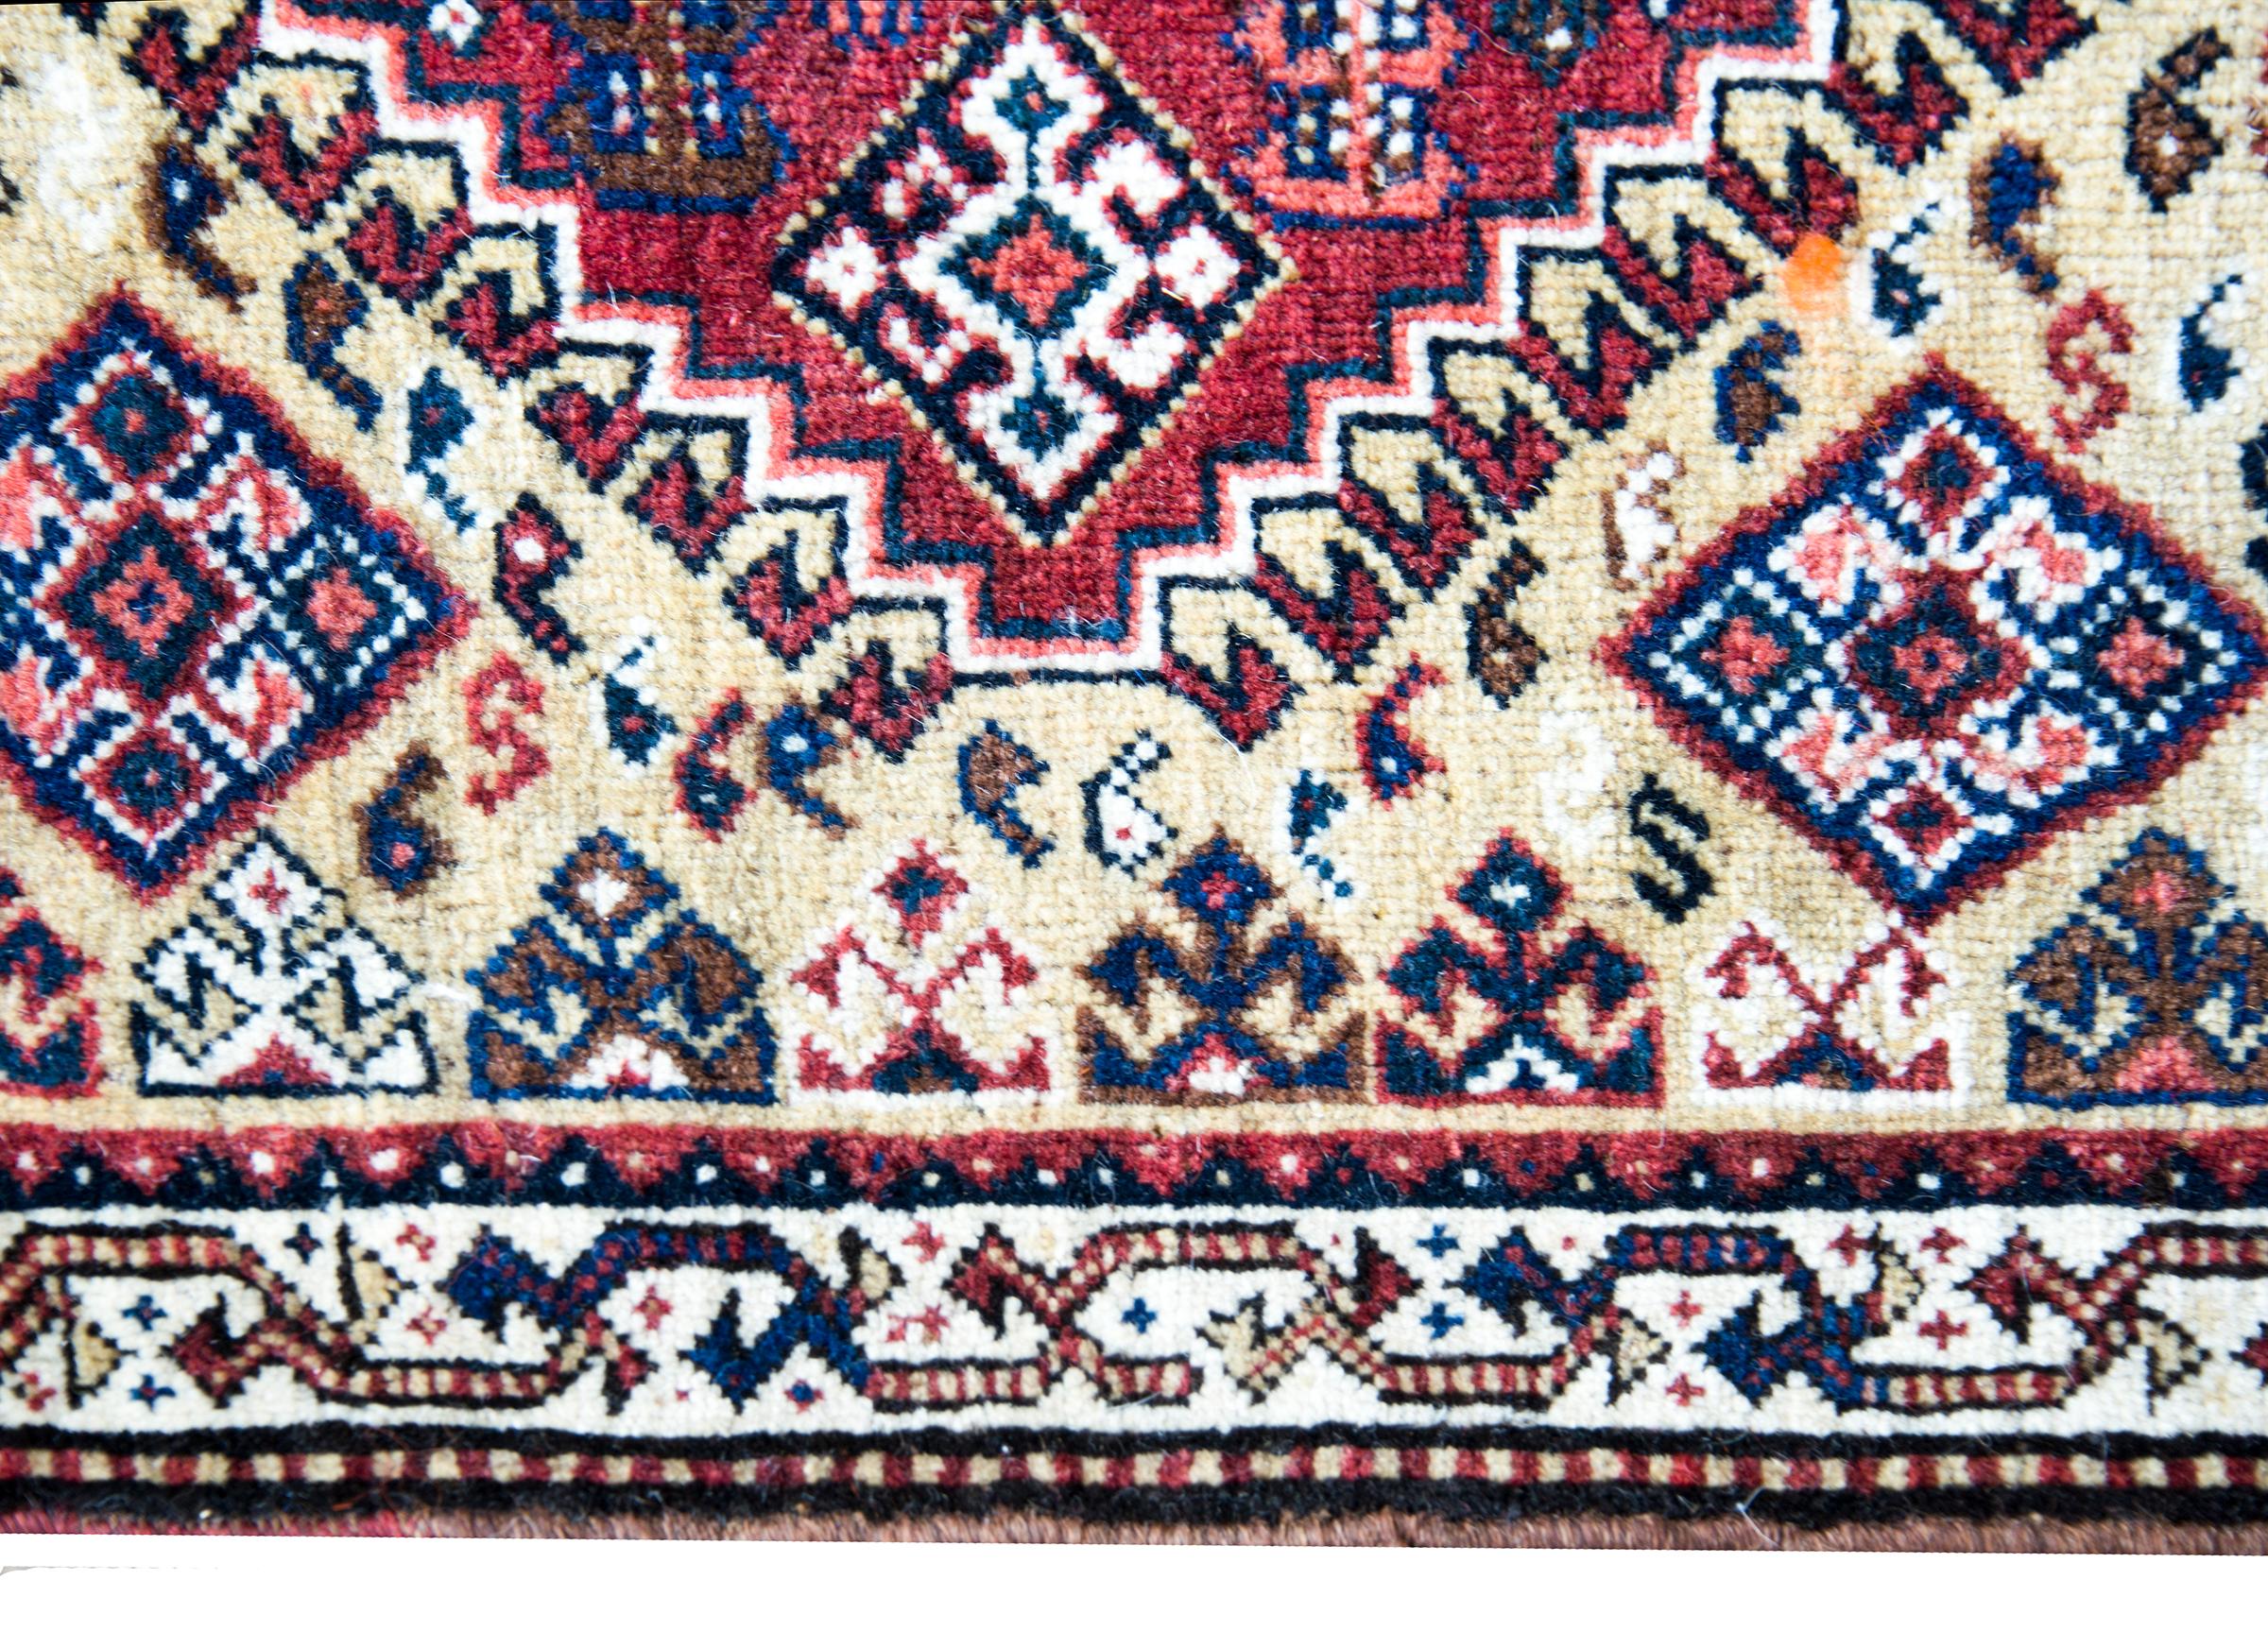 A wonderful early 20th century Persian Afshar rug with a bold tribal pattern with stylized flowers in a diamond medallion amidst a field of more stylized flowers, and surrounded by a floral-inspired border, all woven in crimson, gold, indigo, white,